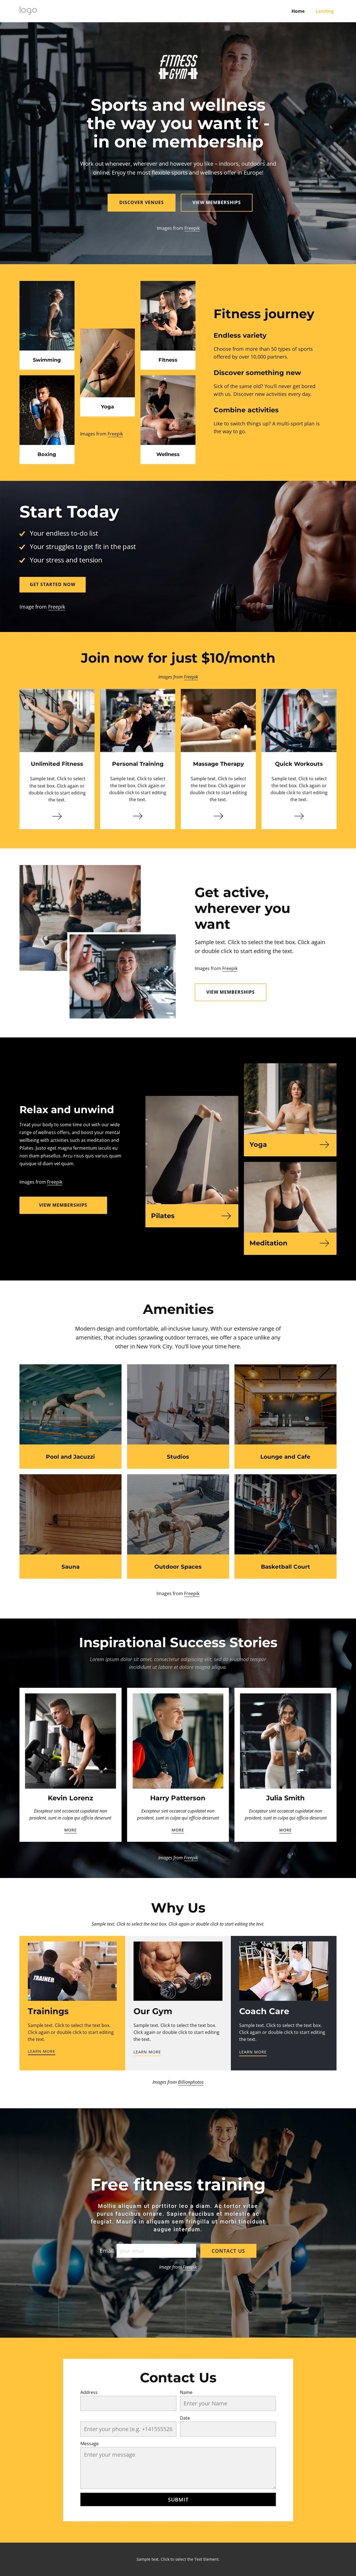 Gym, swimming, fitness classes Website Builder Software